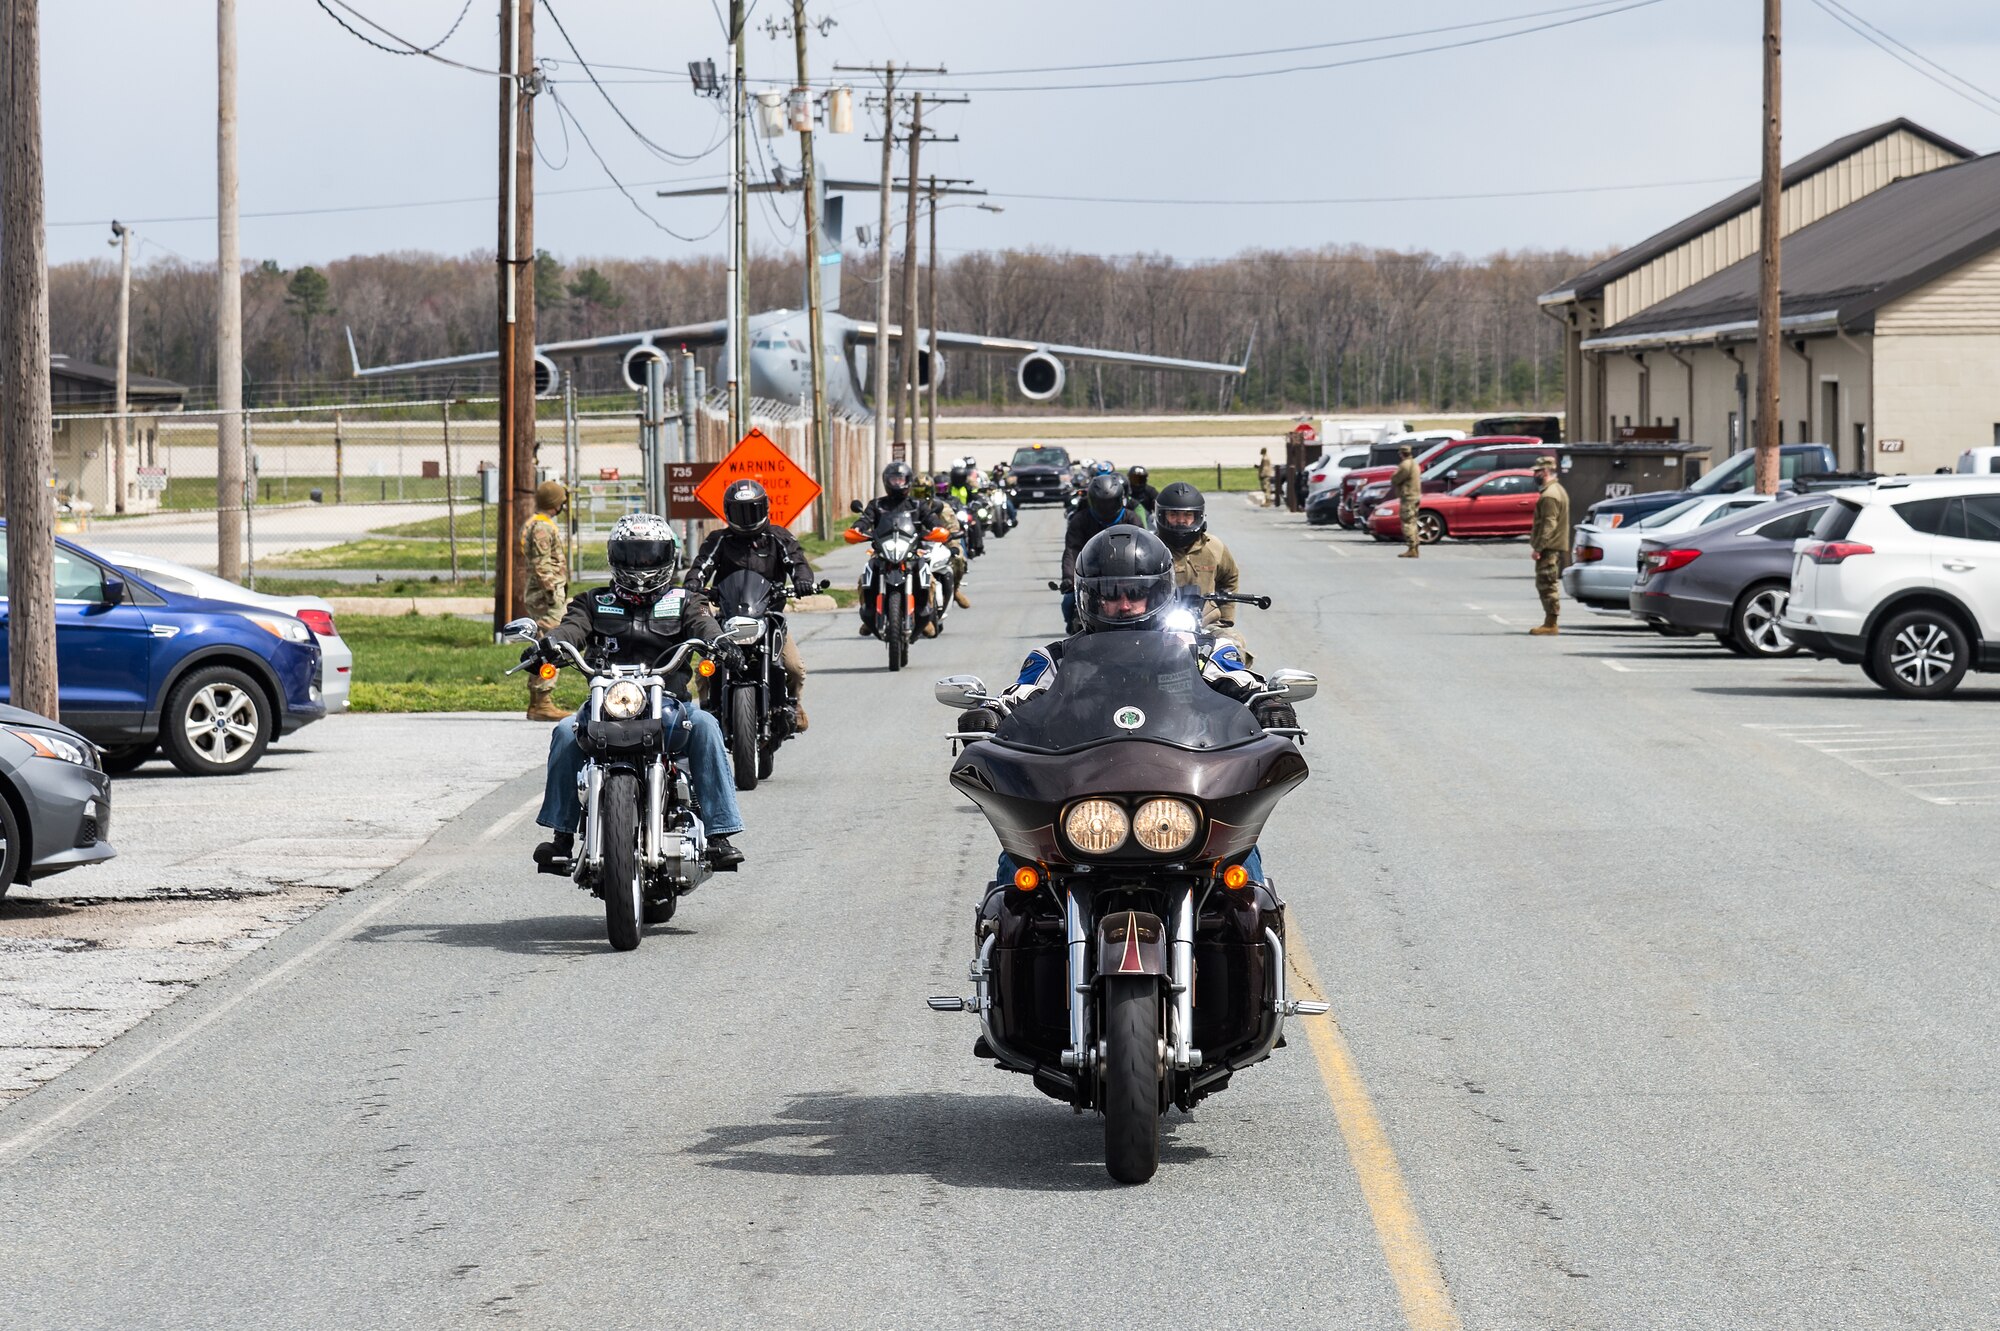 More than 20 motorcyclists ride towards the north gate on Dover Air Force Base, Delaware, April 2, 2021. The riders exited the base for a ride on the highway as part of Dover AFB’s motorcycle safety day. (U.S. Air Force photo by Roland Balik)